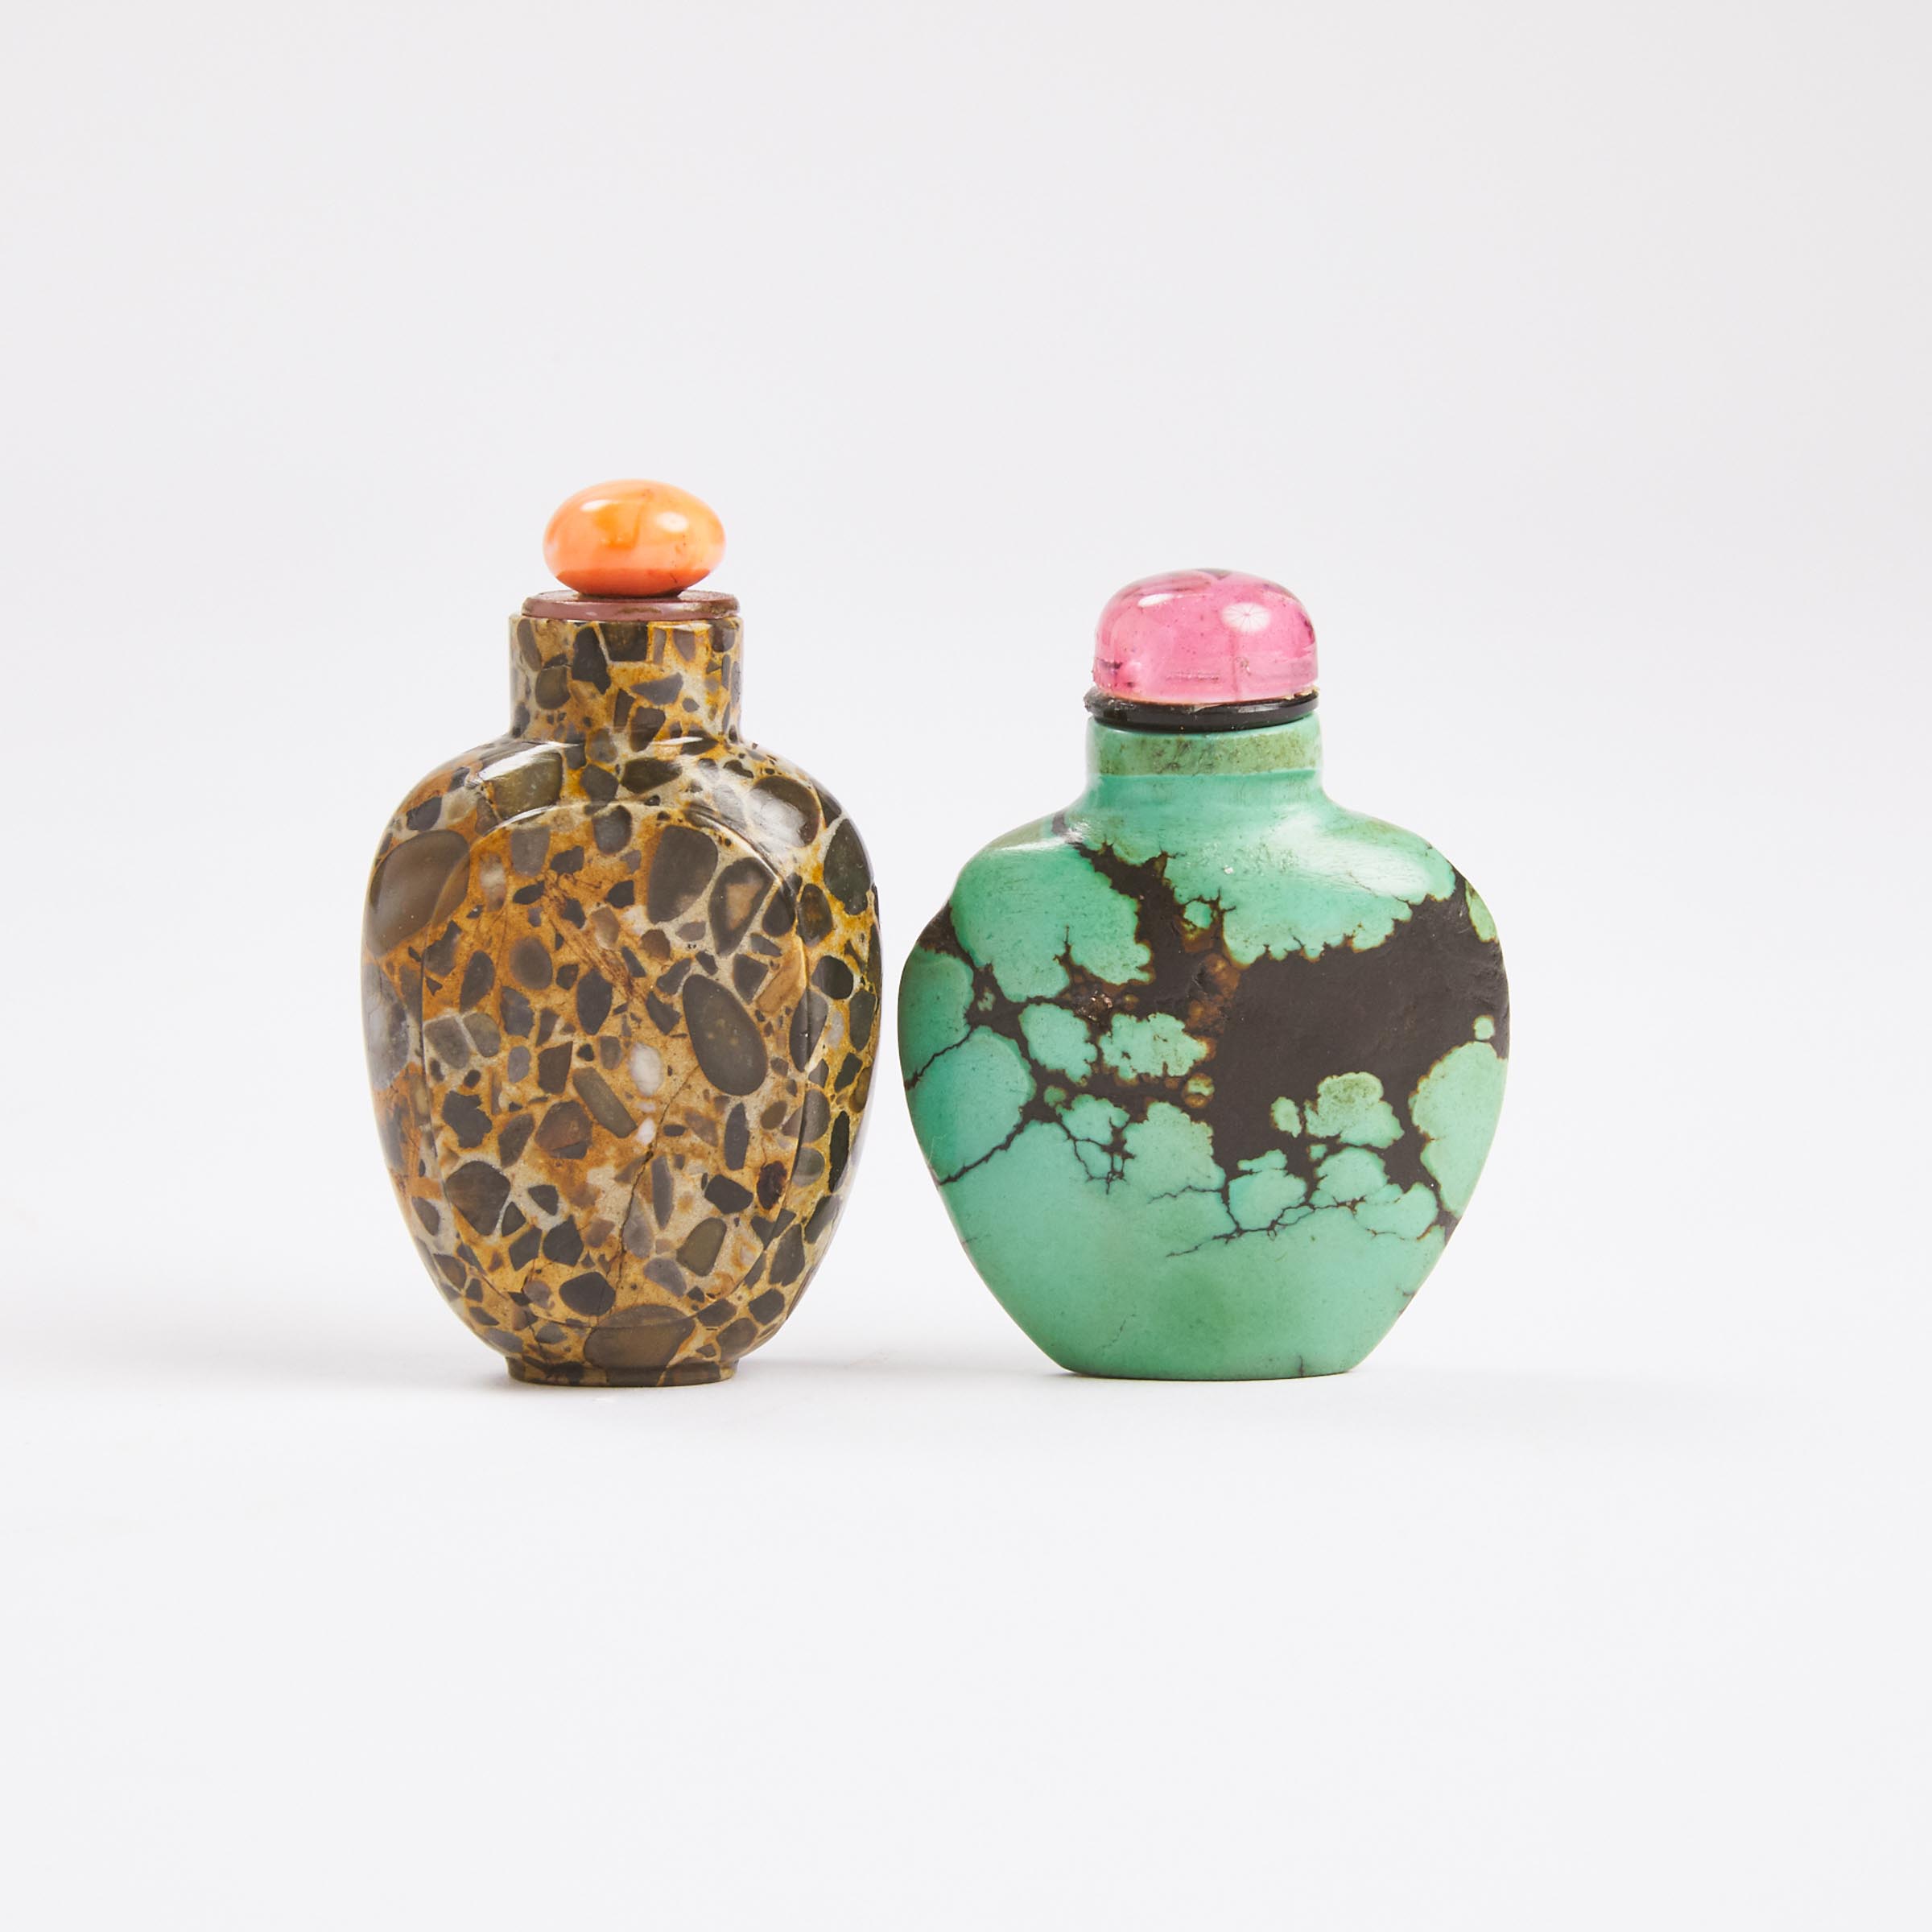 A Puddingstone Snuff Bottle, Together With a Turquoise Snuff Bottle, 18th/19th Century